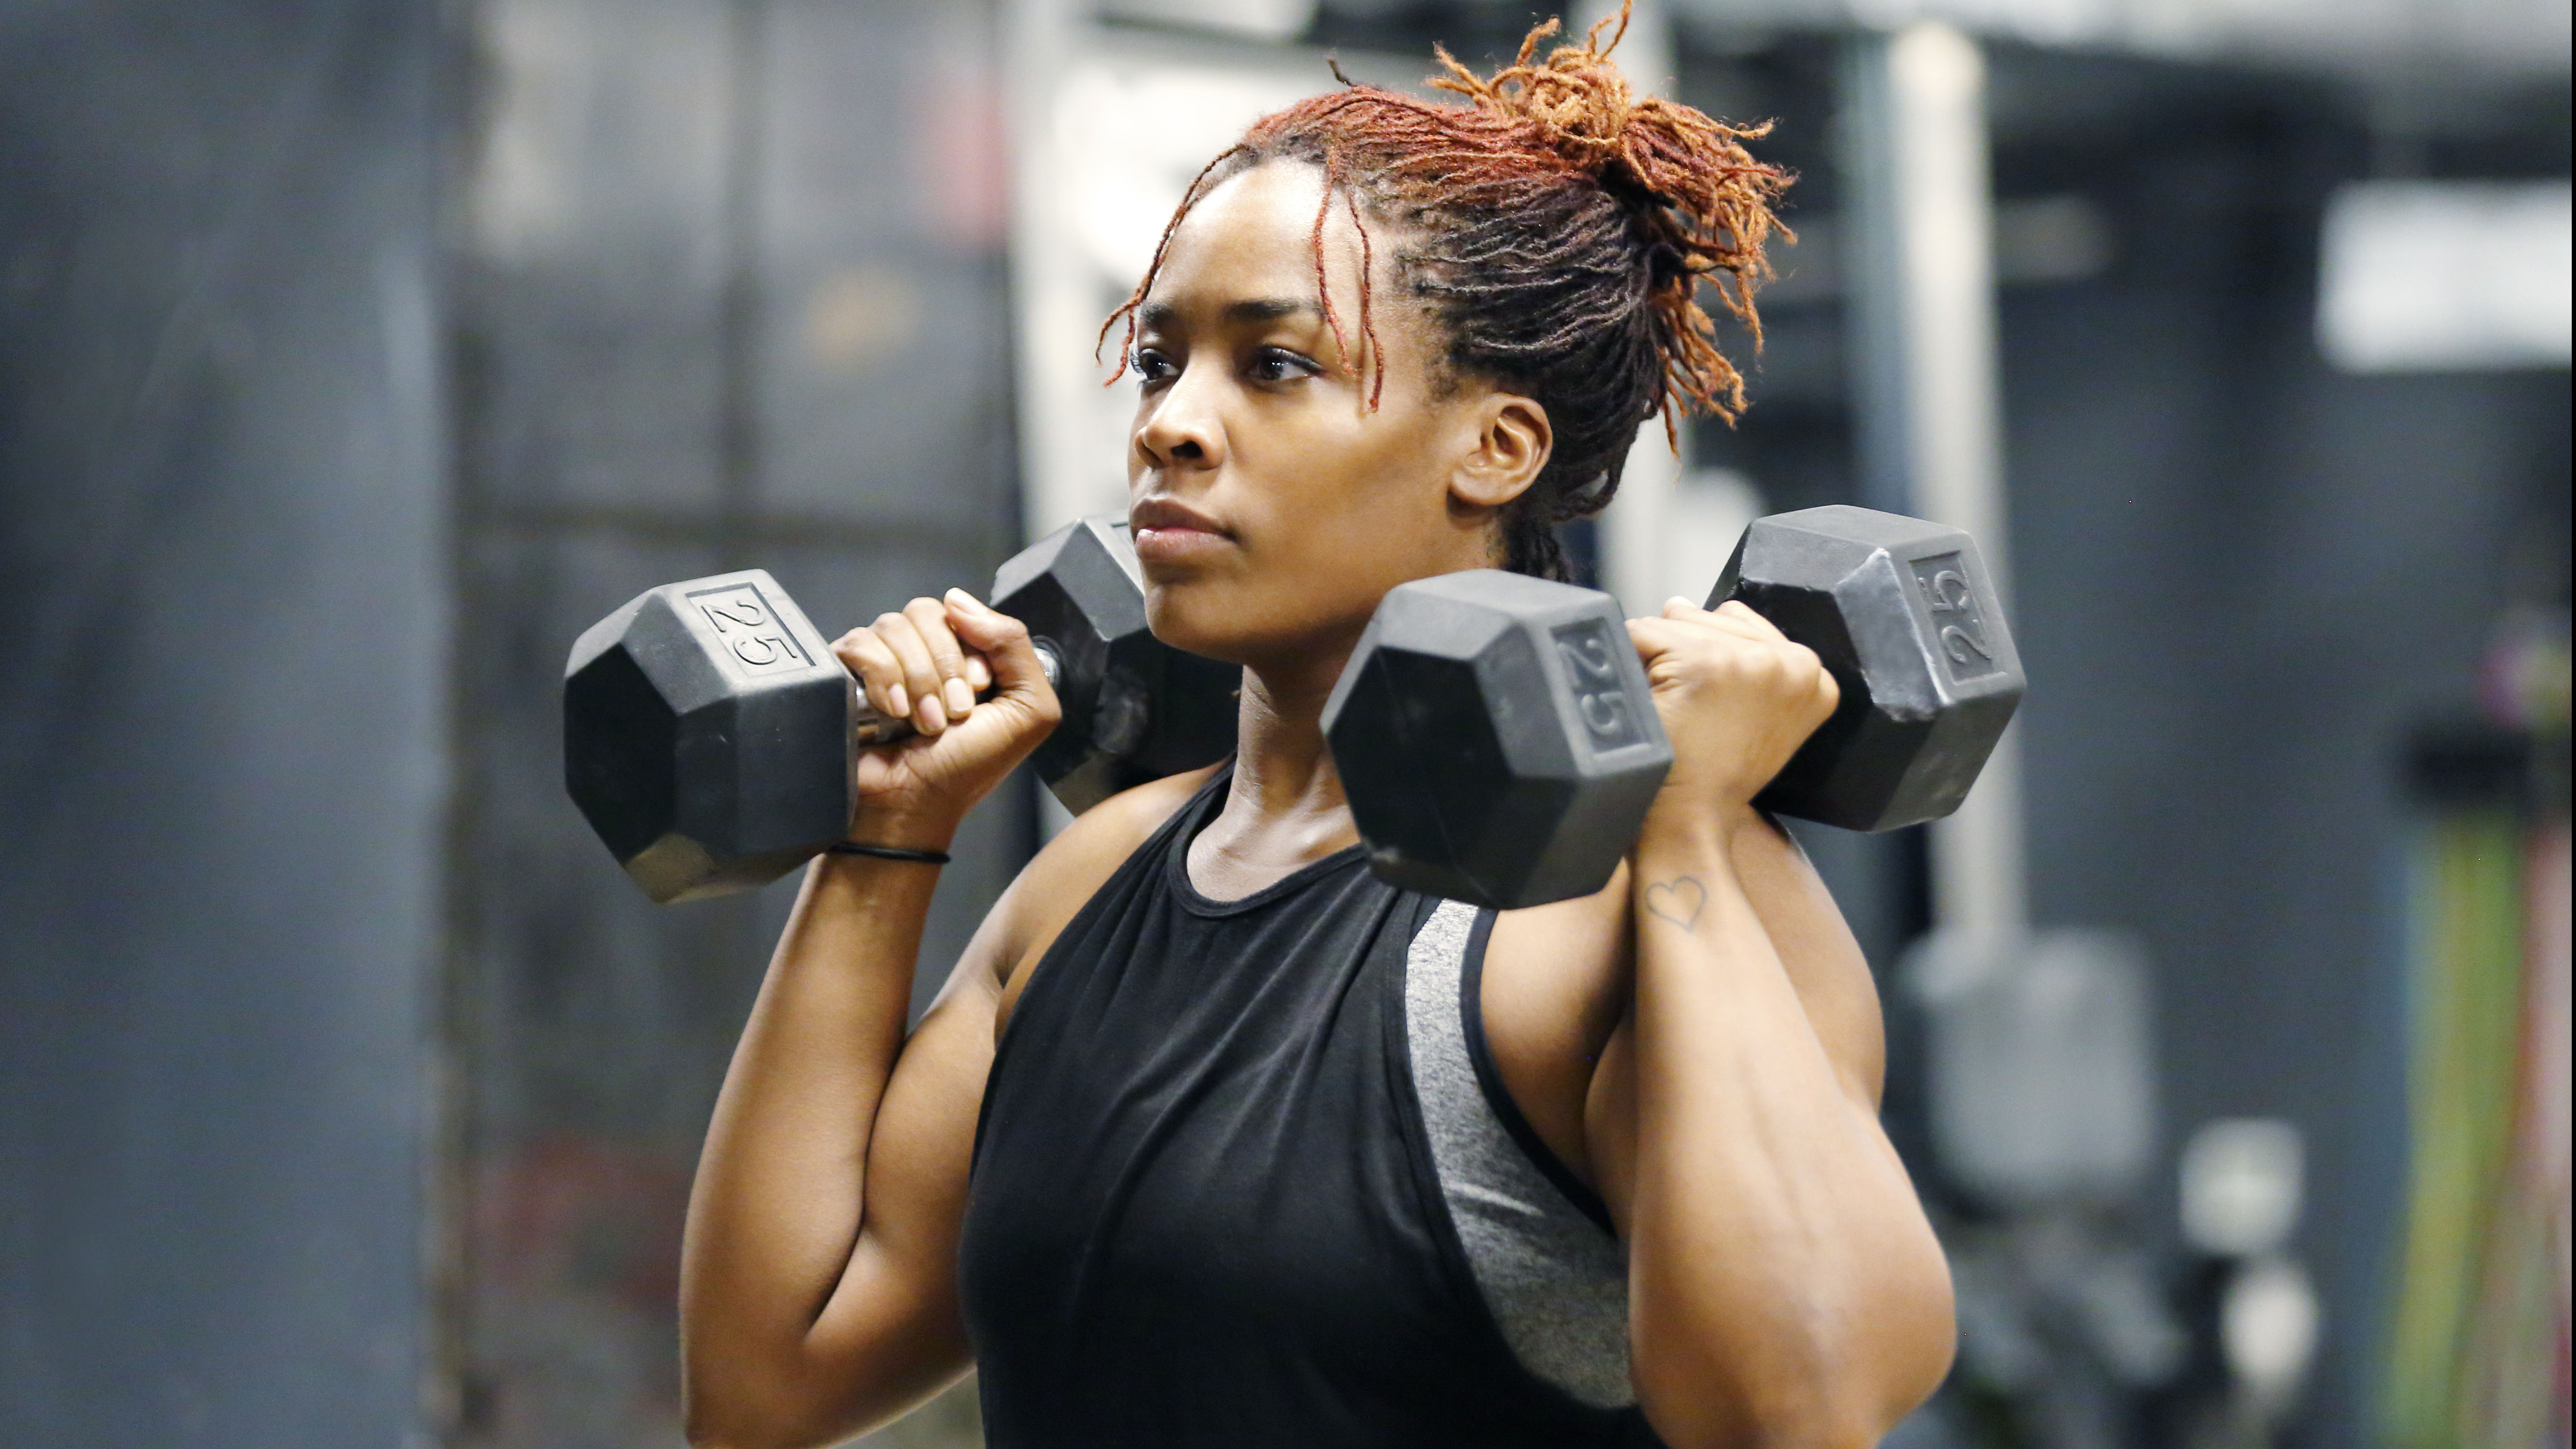 A woman lifts weights in the gym